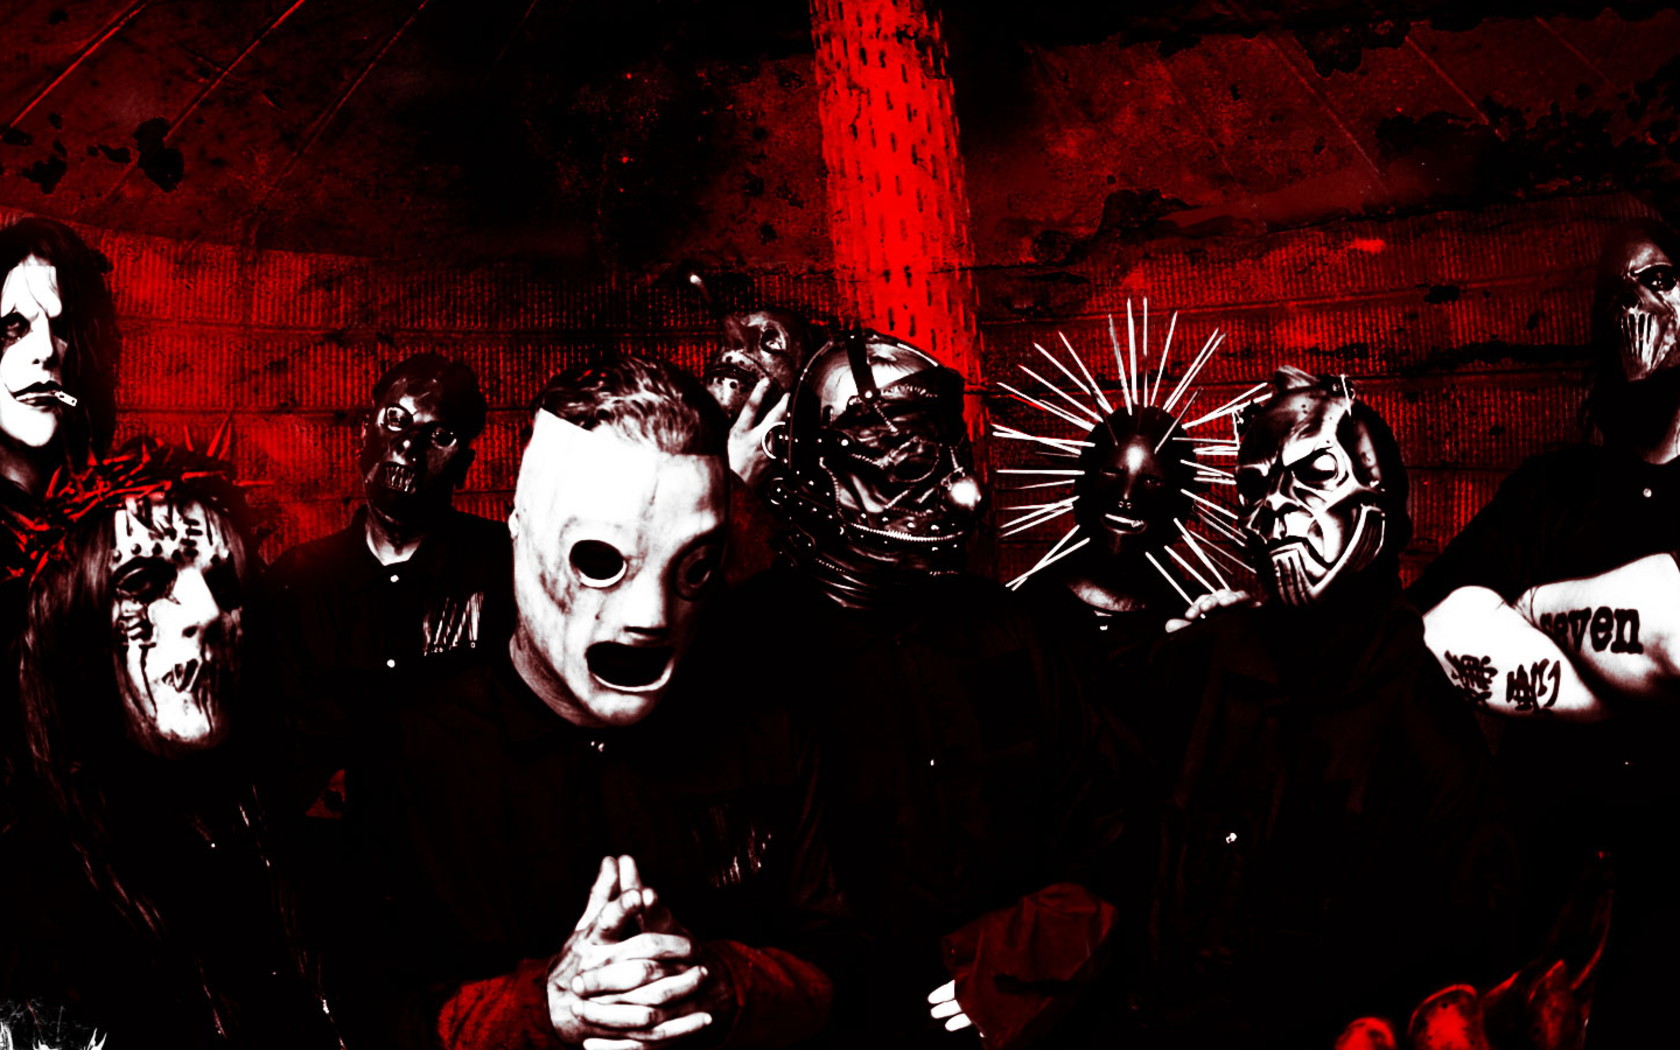 60+ Slipknot HD Wallpapers and Backgrounds